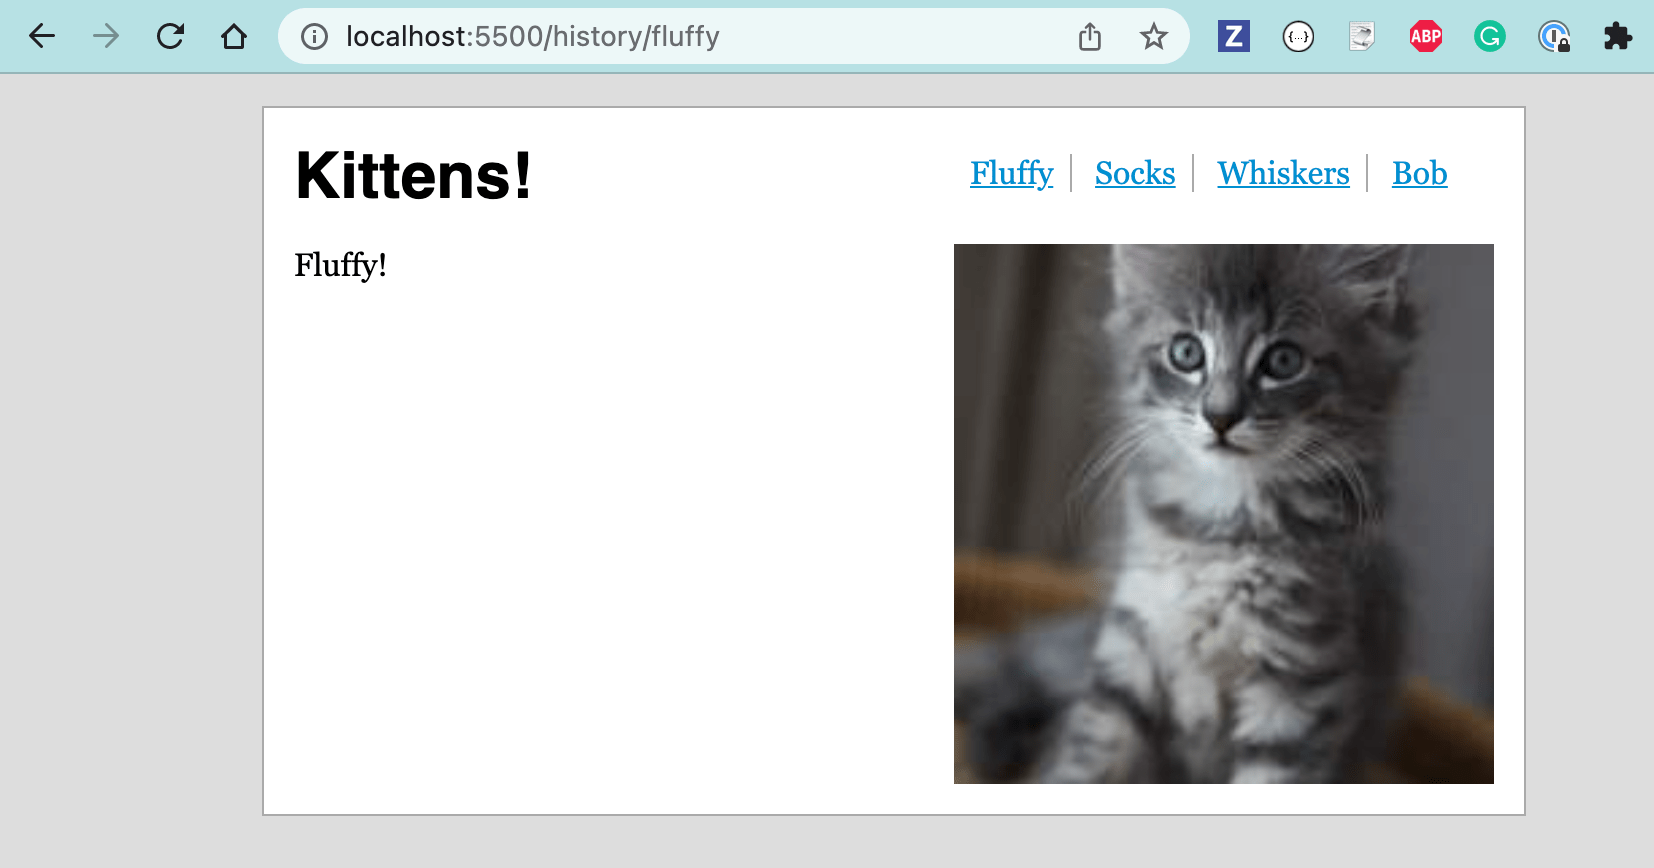 The Cats example application